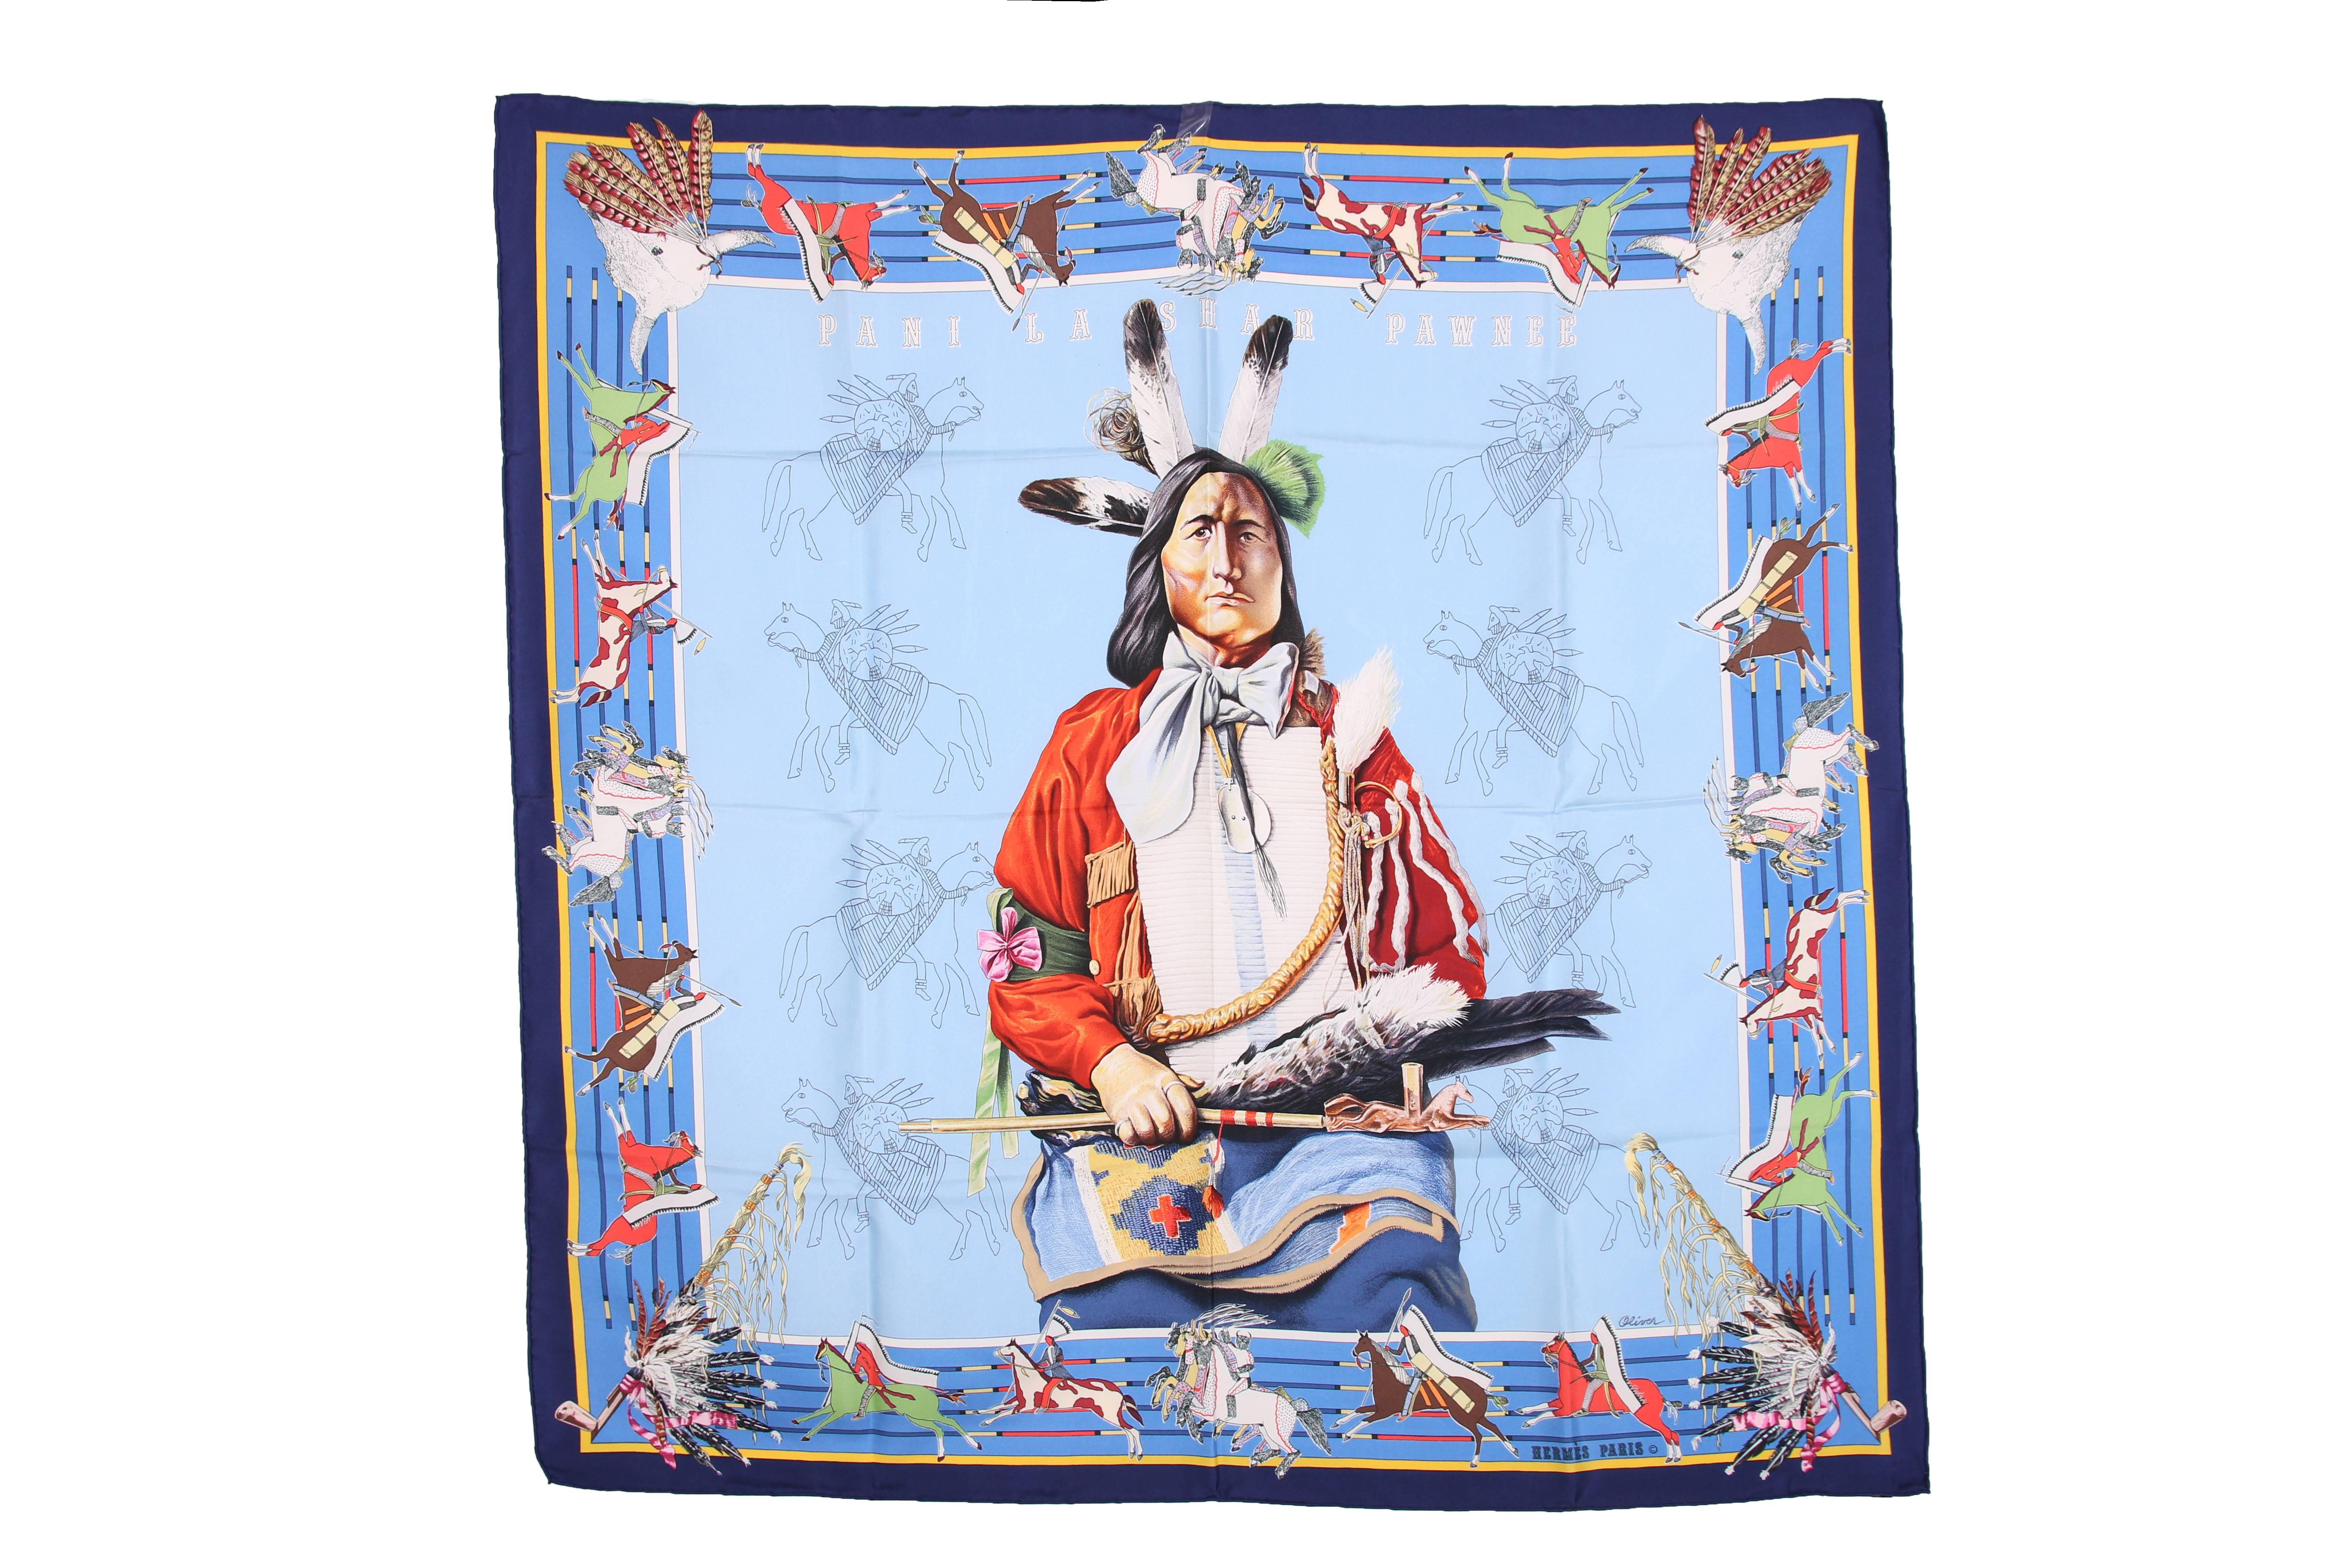 Hermes "Pani La Shar Pawnee" 35x35" (90cmx90cm) blue colorway 100% silk scarf designed by Kermit Oliver circa 1984. In mint condition - signed and has all authentic tags.
MEASUREMENTS:
35" x 35"